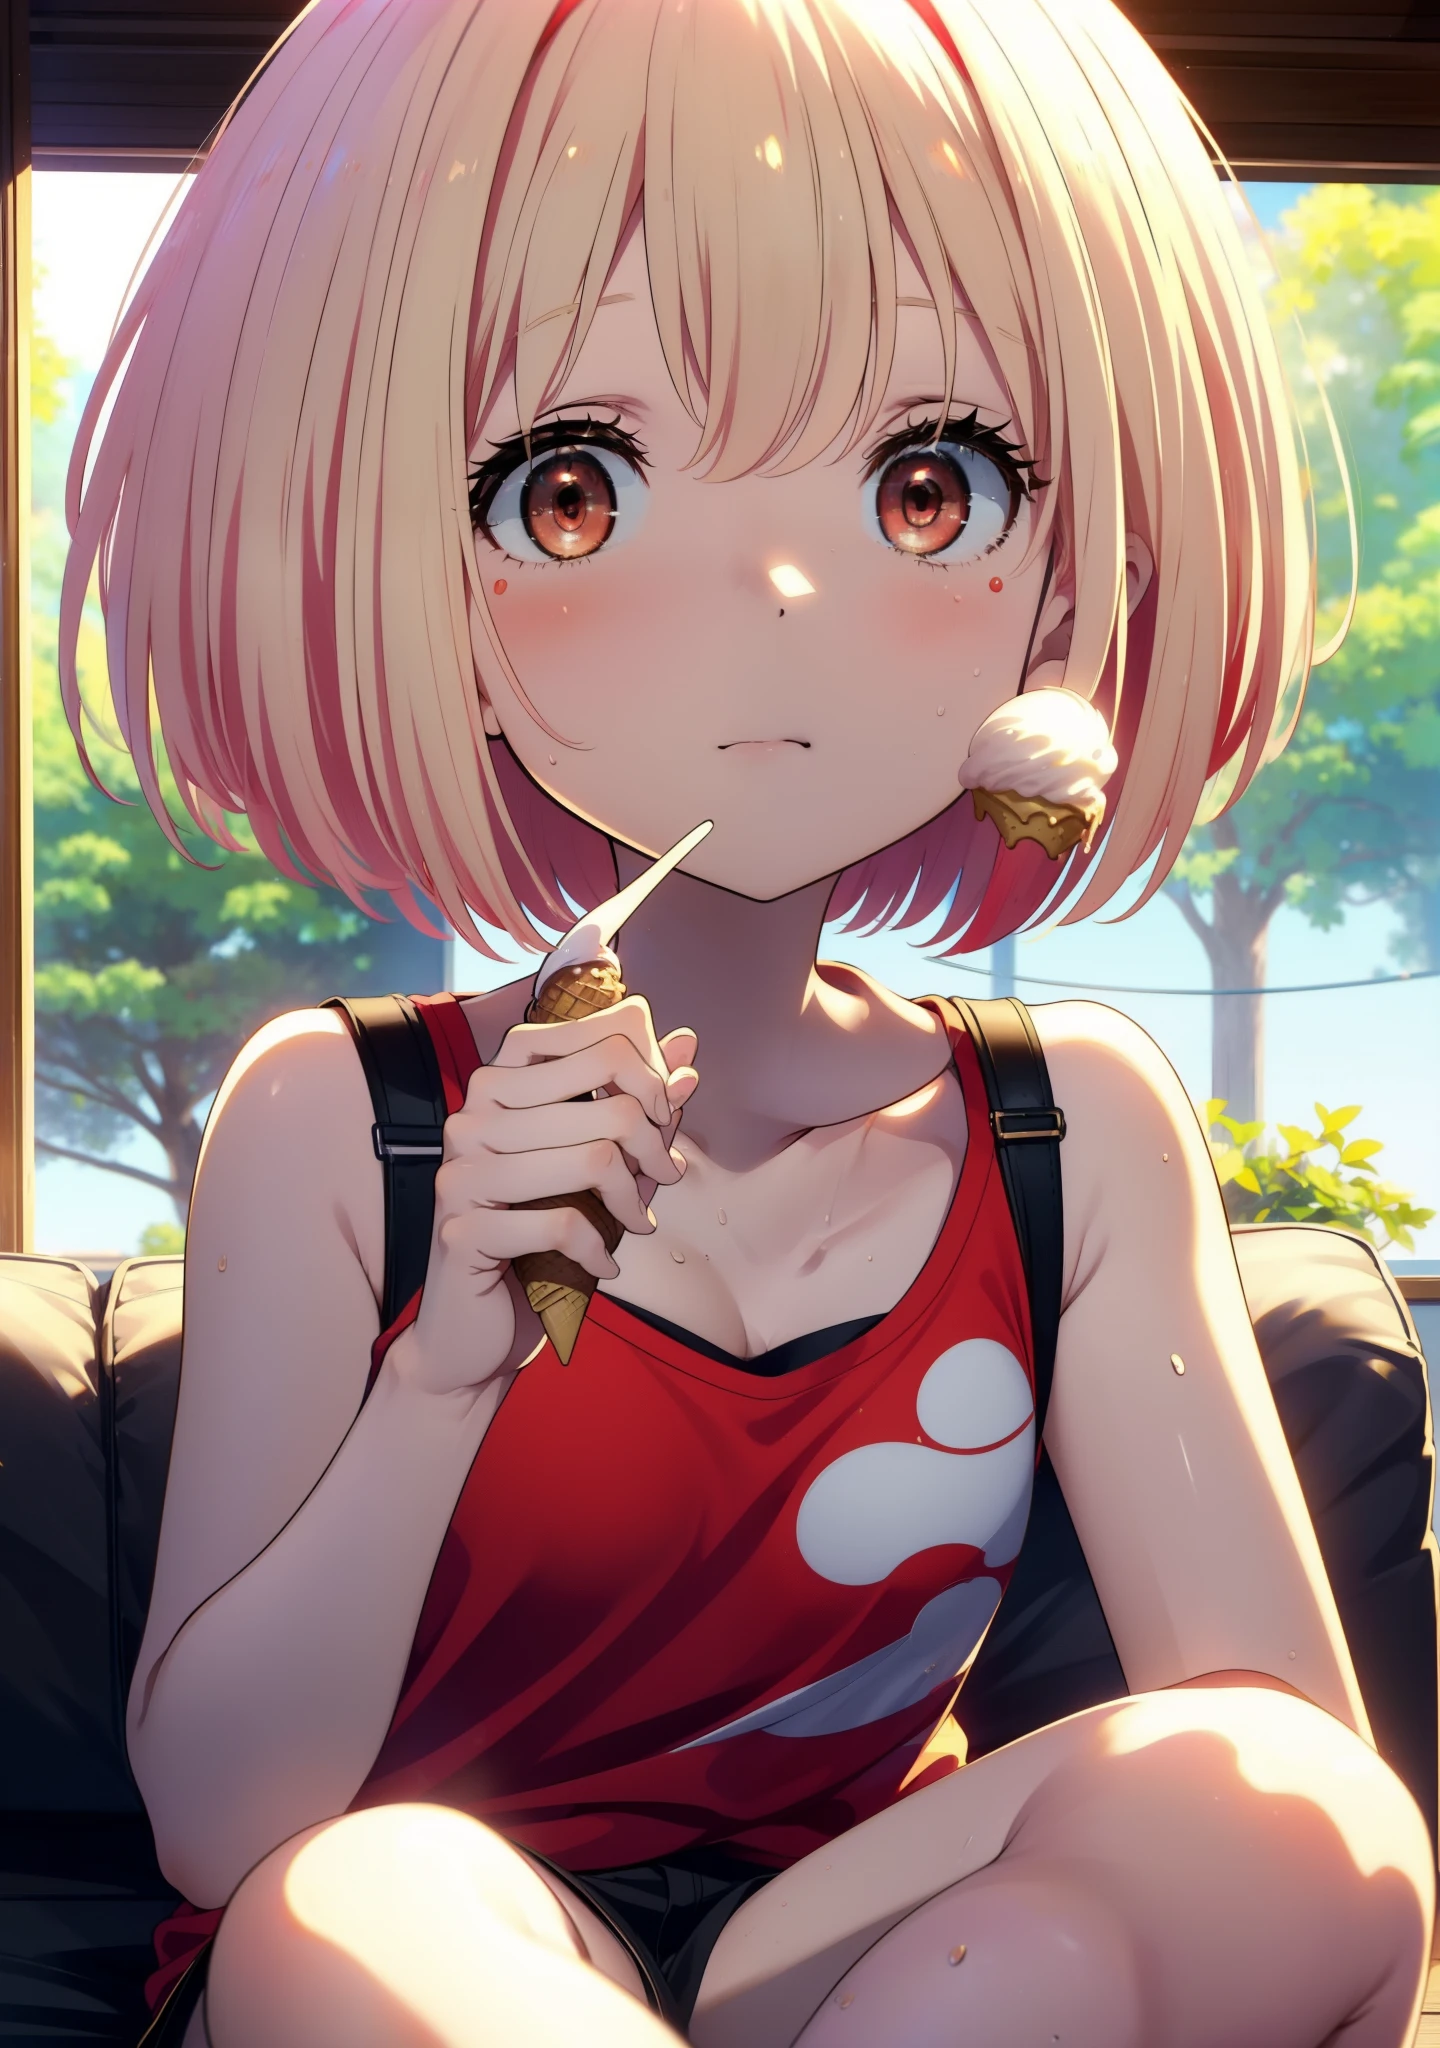  Chisato Nishikigi, short hair, bangs, Blonde, (Red eyes:1.5), Bobcut,smile,Open your mouth,Sweat,Red Tank Top,Shorts,barefoot,barefoot,Sitting on the sofa,Holding an ice cream in one hand,Eating ice cream,Daytime,True Summer,whole bodyがイラストに入るように,
break outdoors,room,
break looking at viewer, whole body,
break (masterpiece:1.2), Highest quality, High resolution, unity 8k wallpaper, (figure:0.8), (Beautiful attention to detail:1.6), Highly detailed face, Perfect lighting, Highly detailed CG, (Perfect hands, Perfect Anatomy),